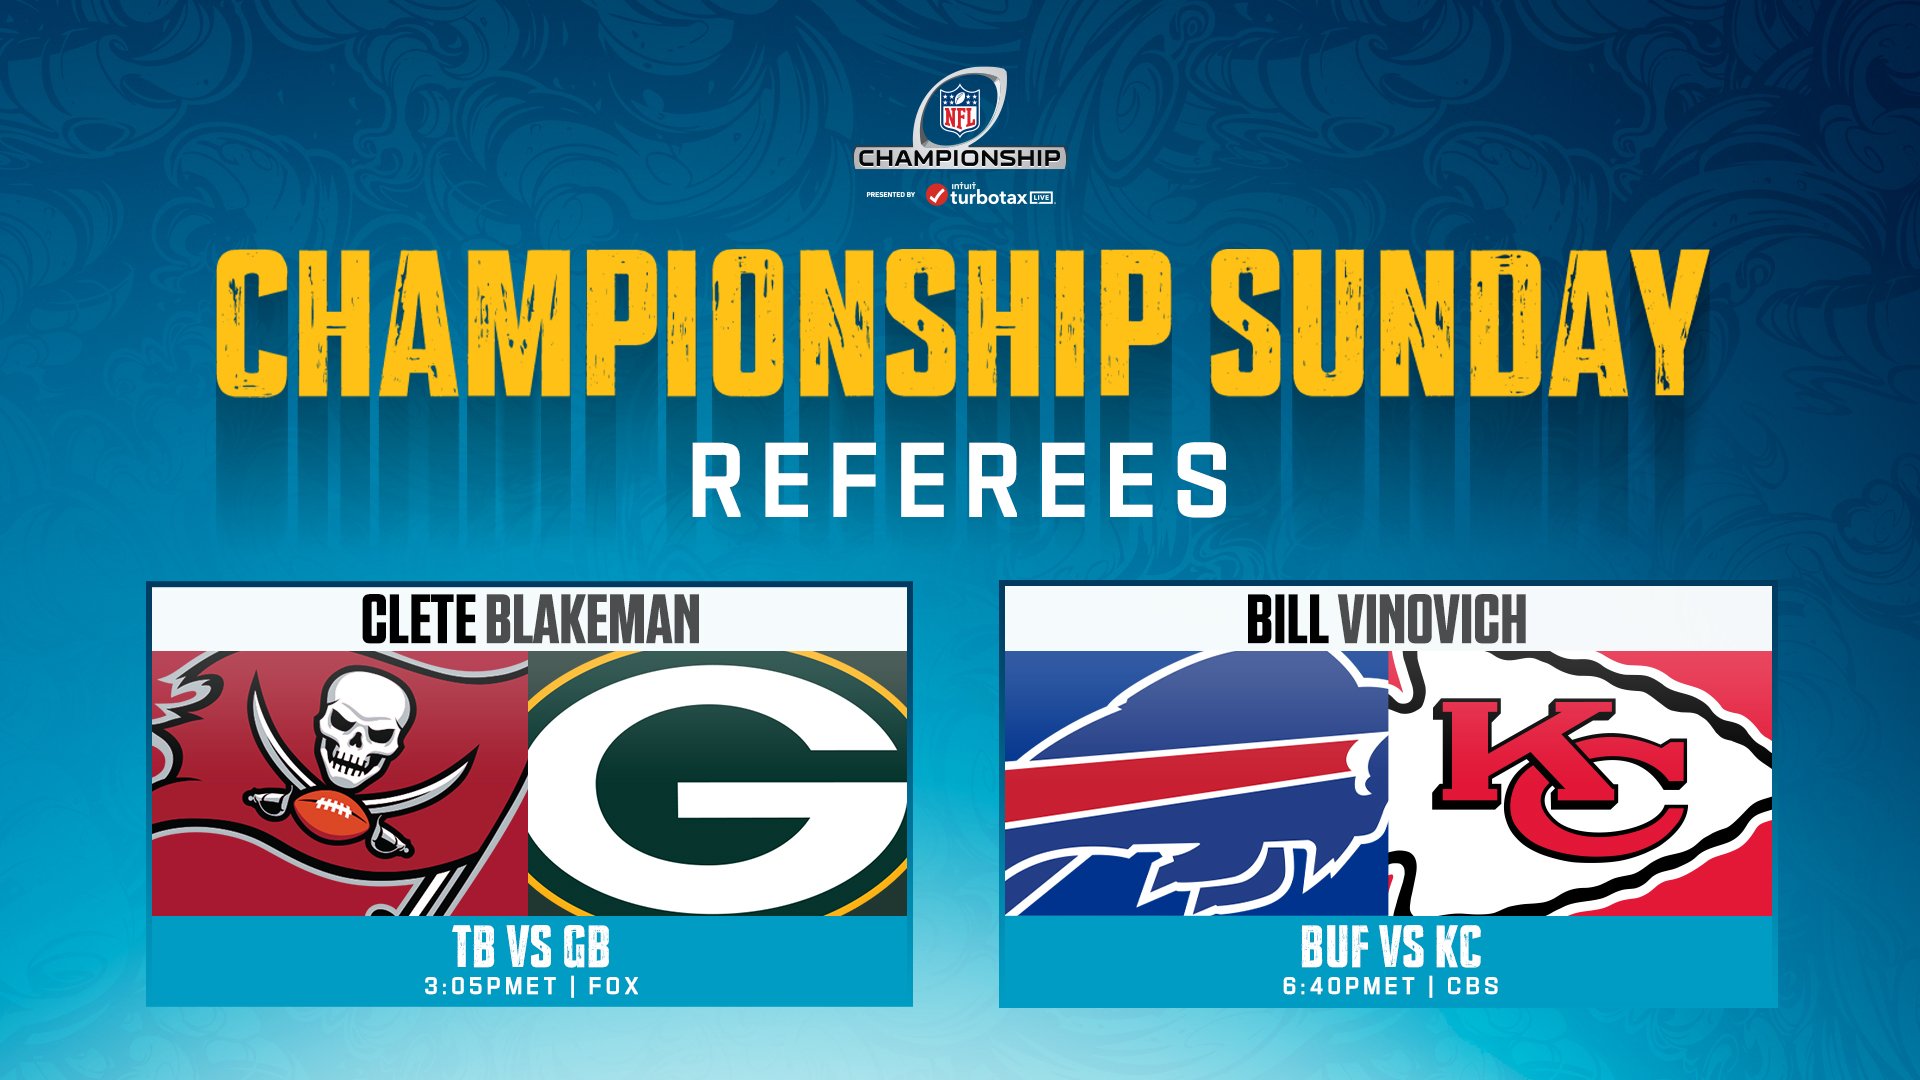 nfl conference championship game